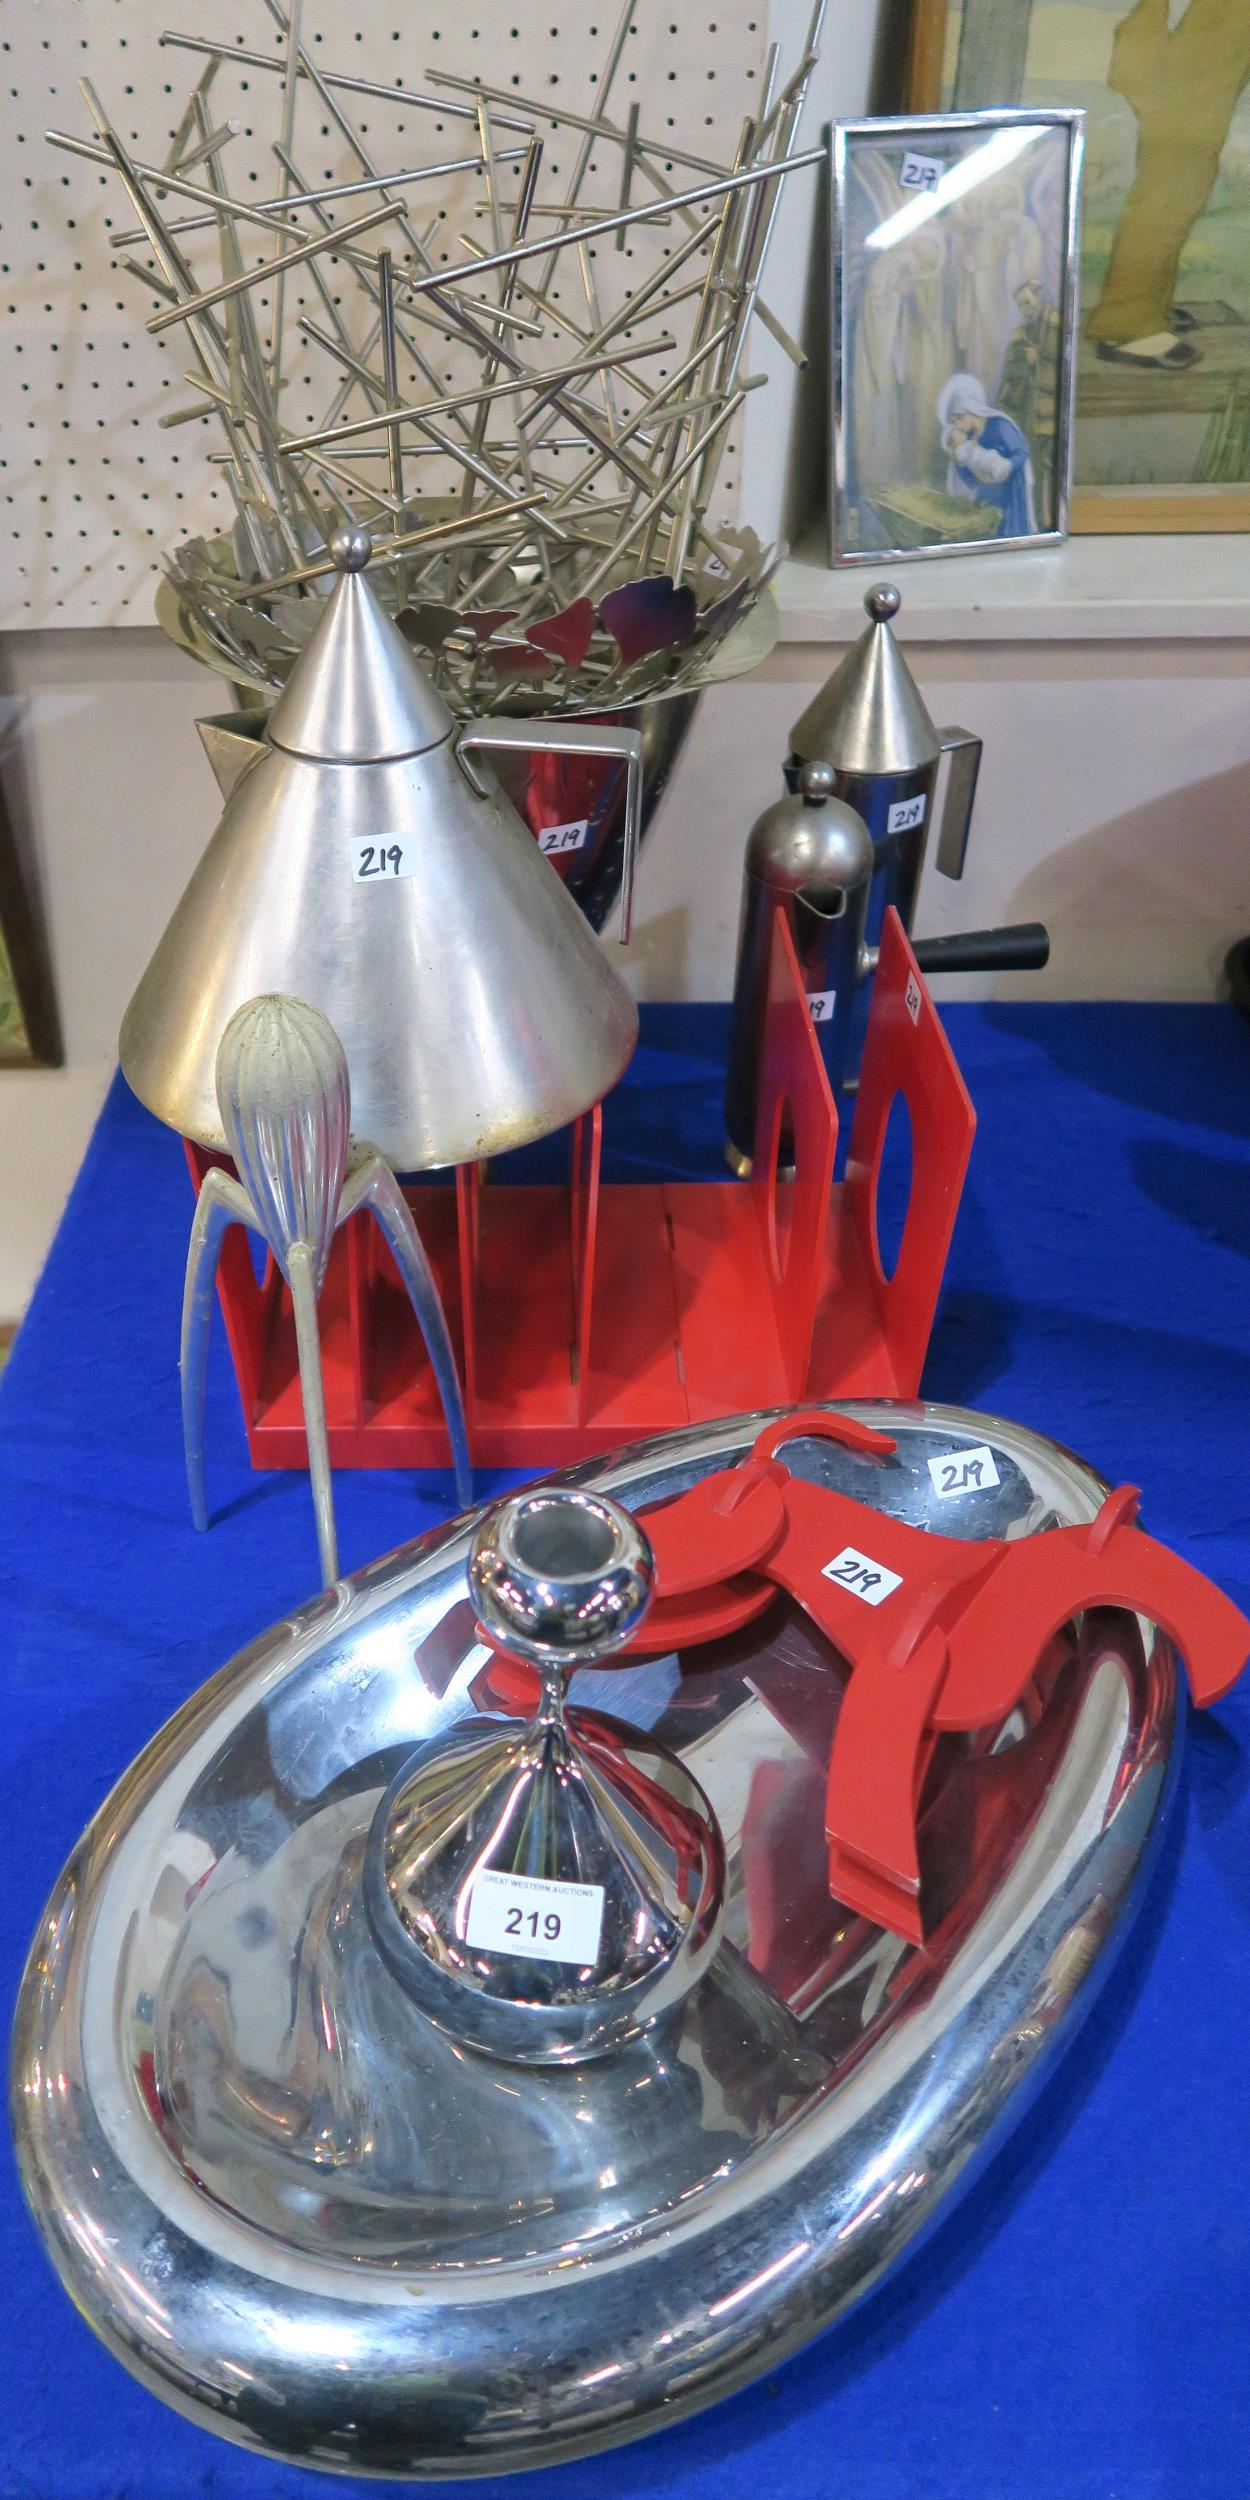 Assorted Alessi items including a Juicy Salif Citrus Squeezer, a